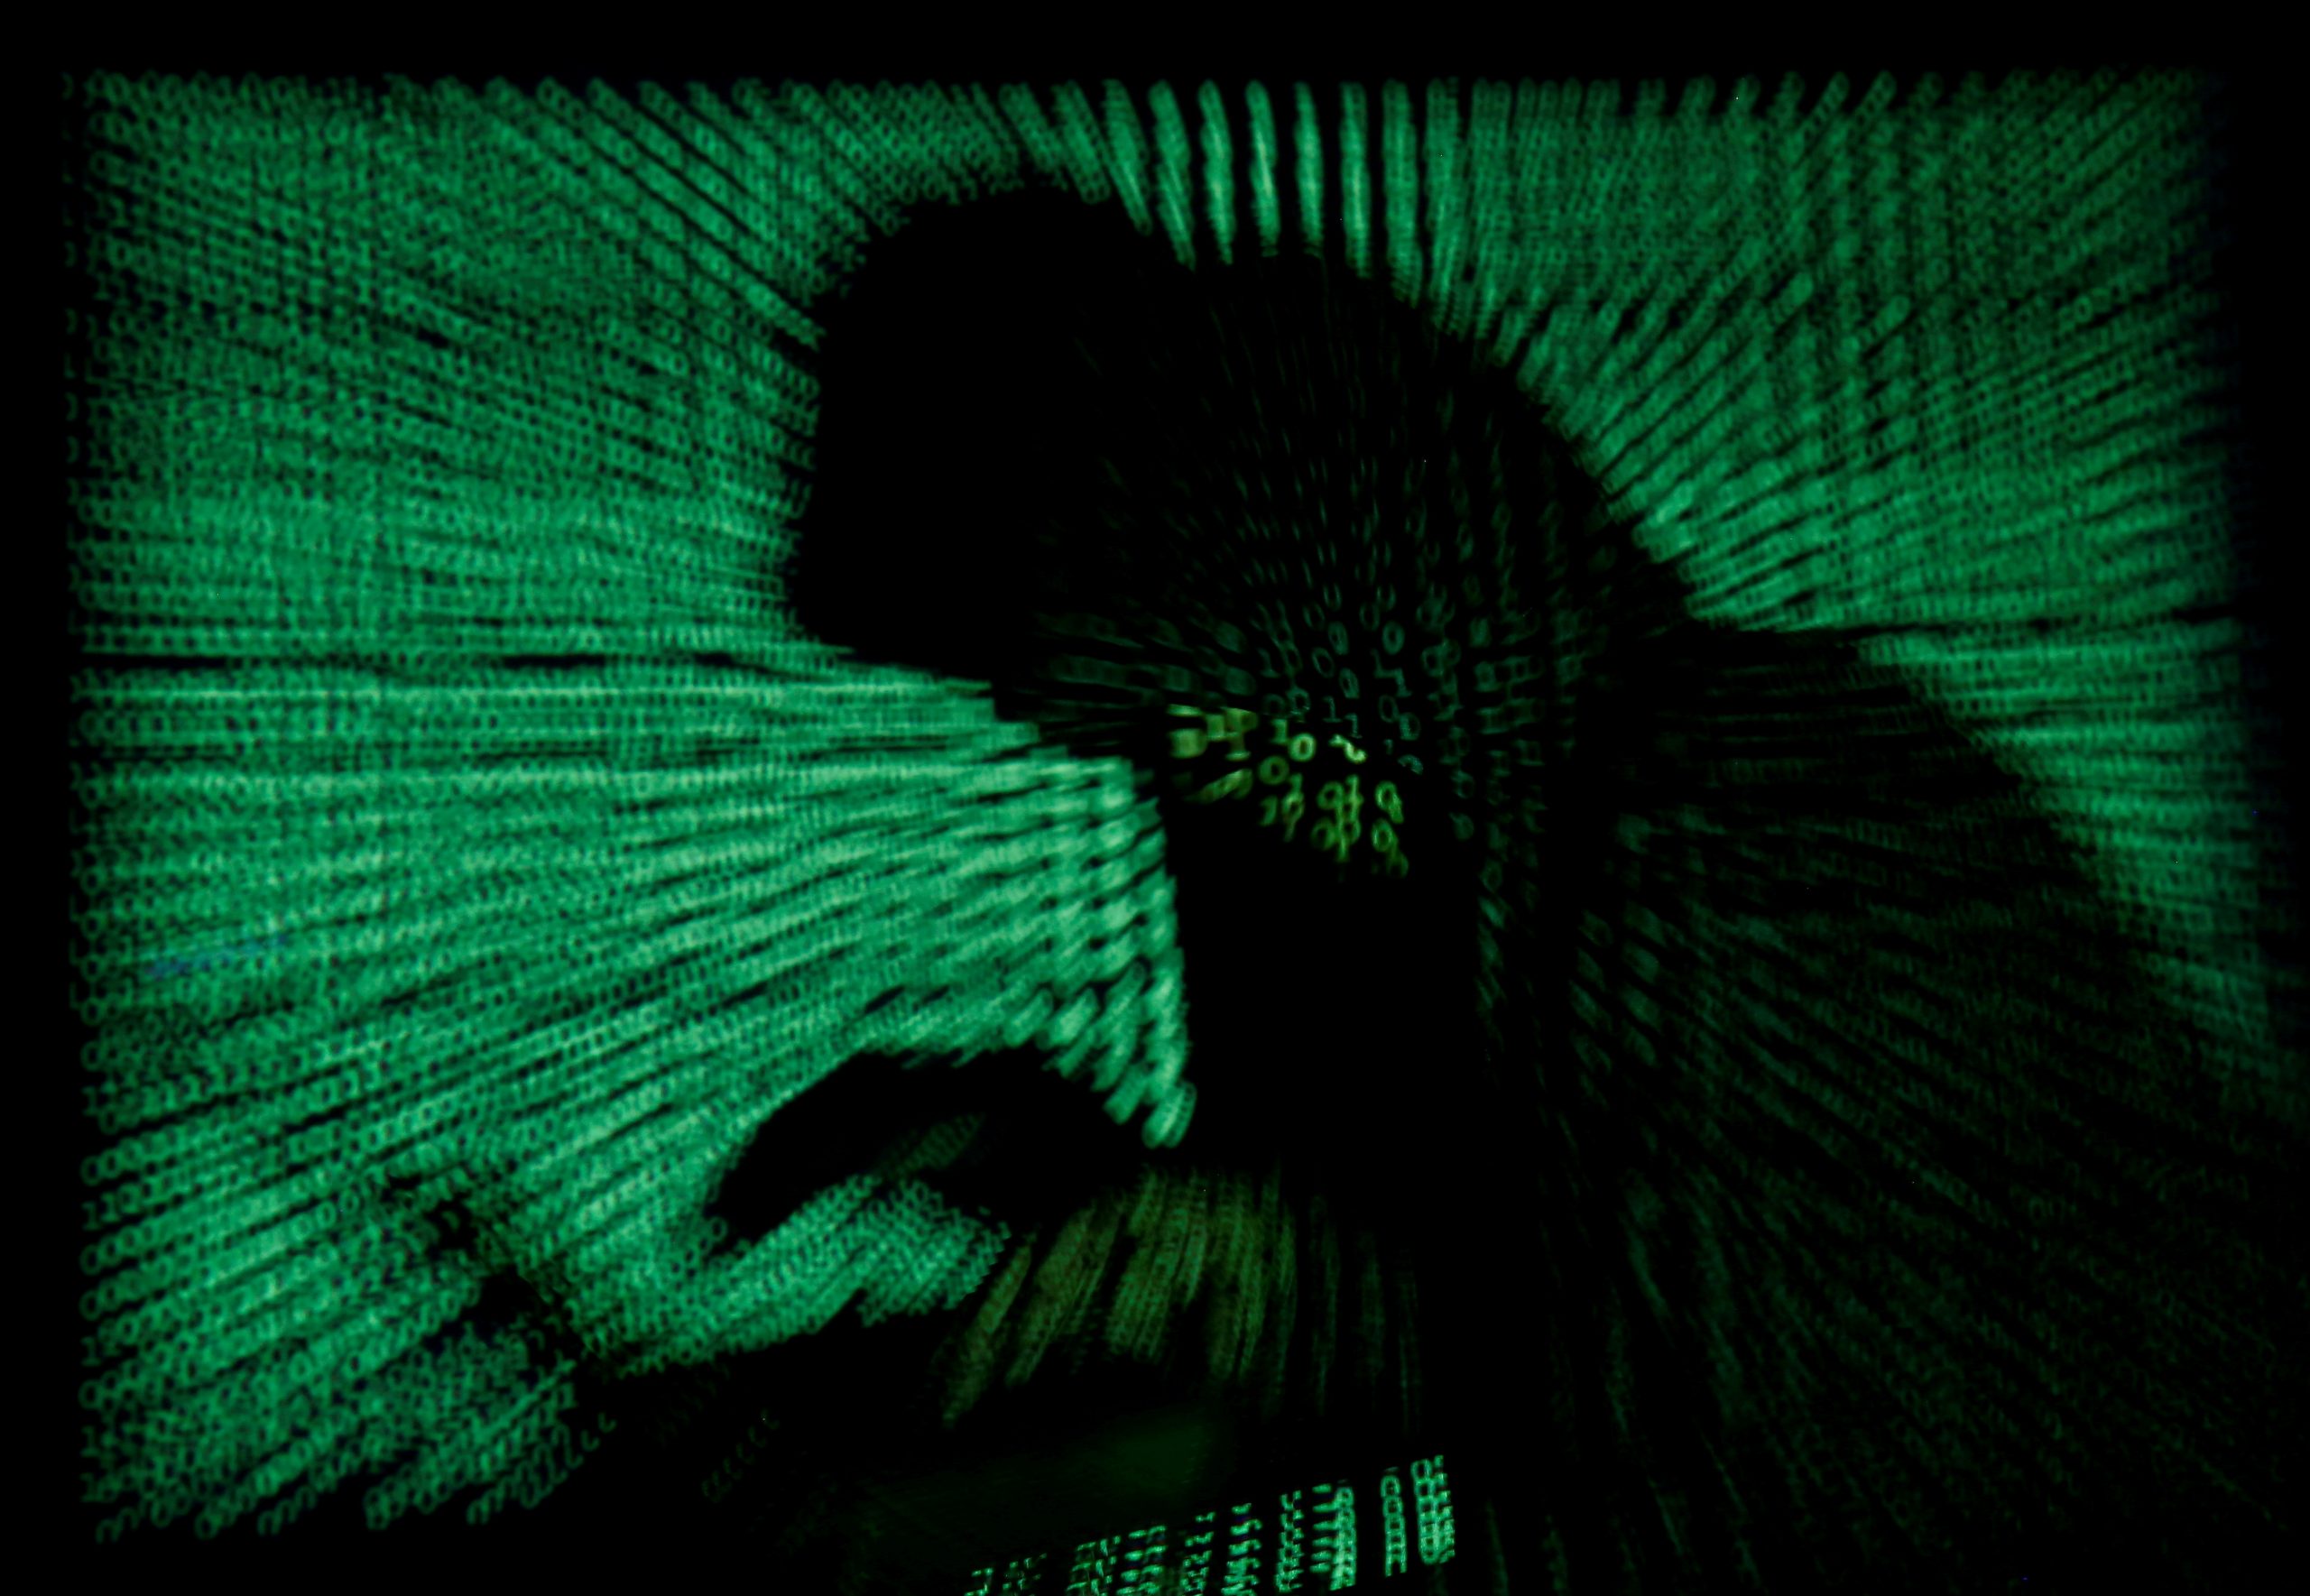  Exclusive: U.S. to give ransomware hacks similar priority as terrorism